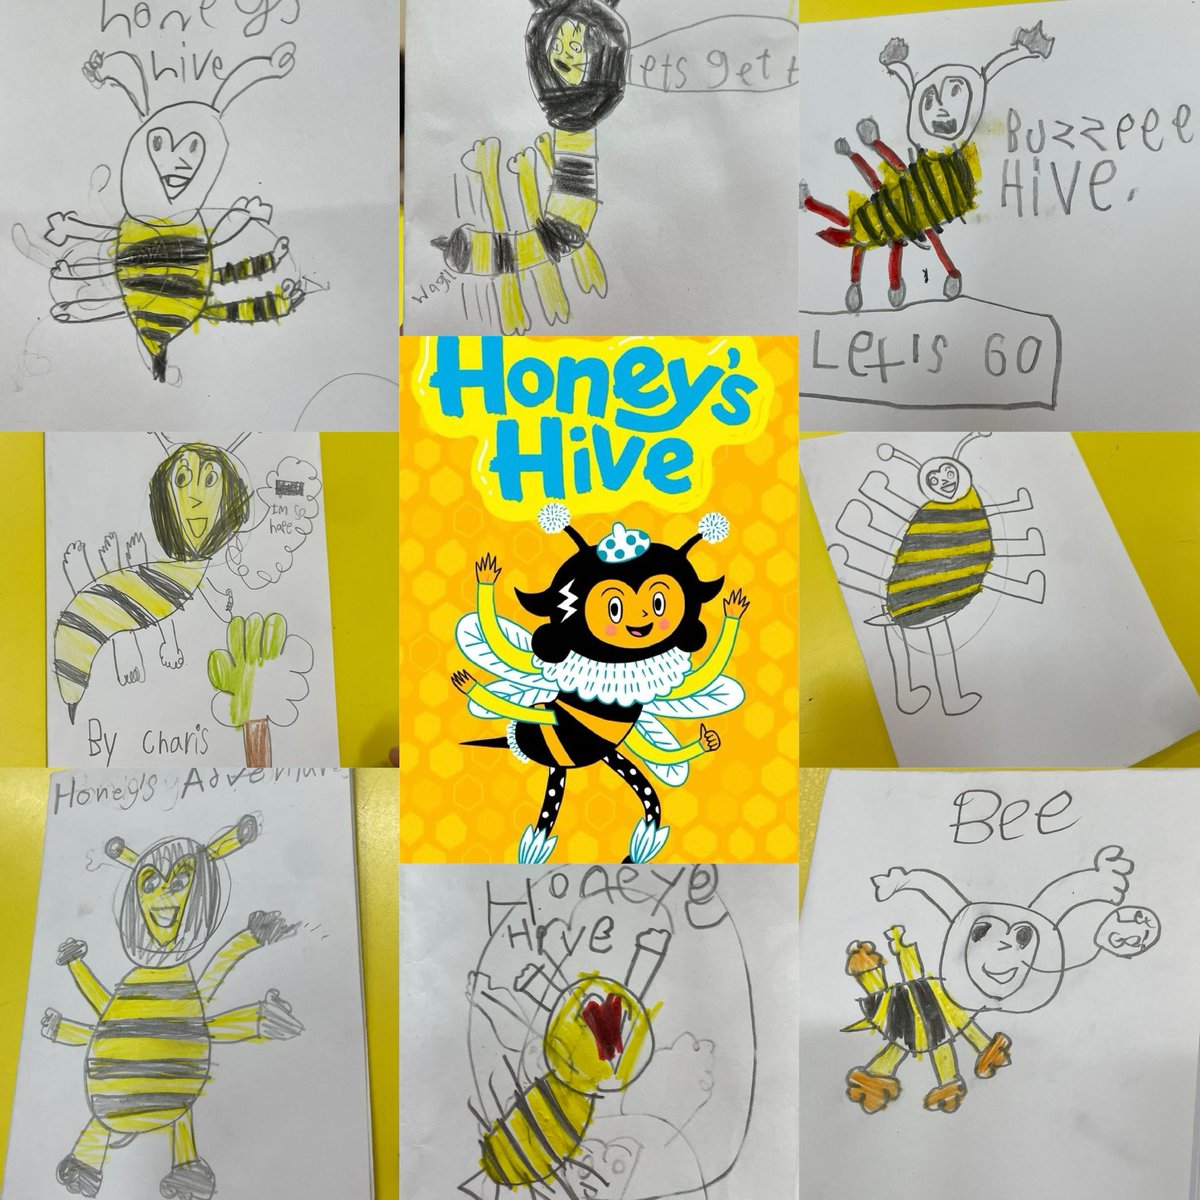 Having a wonderful week doing Honey's Hive workshops! Lots of young creative writers + illustrators out there. And lots of fun waggle dancing too! 🐝 @AyaKakeda @AndersenPress @AuthorsAbroad_